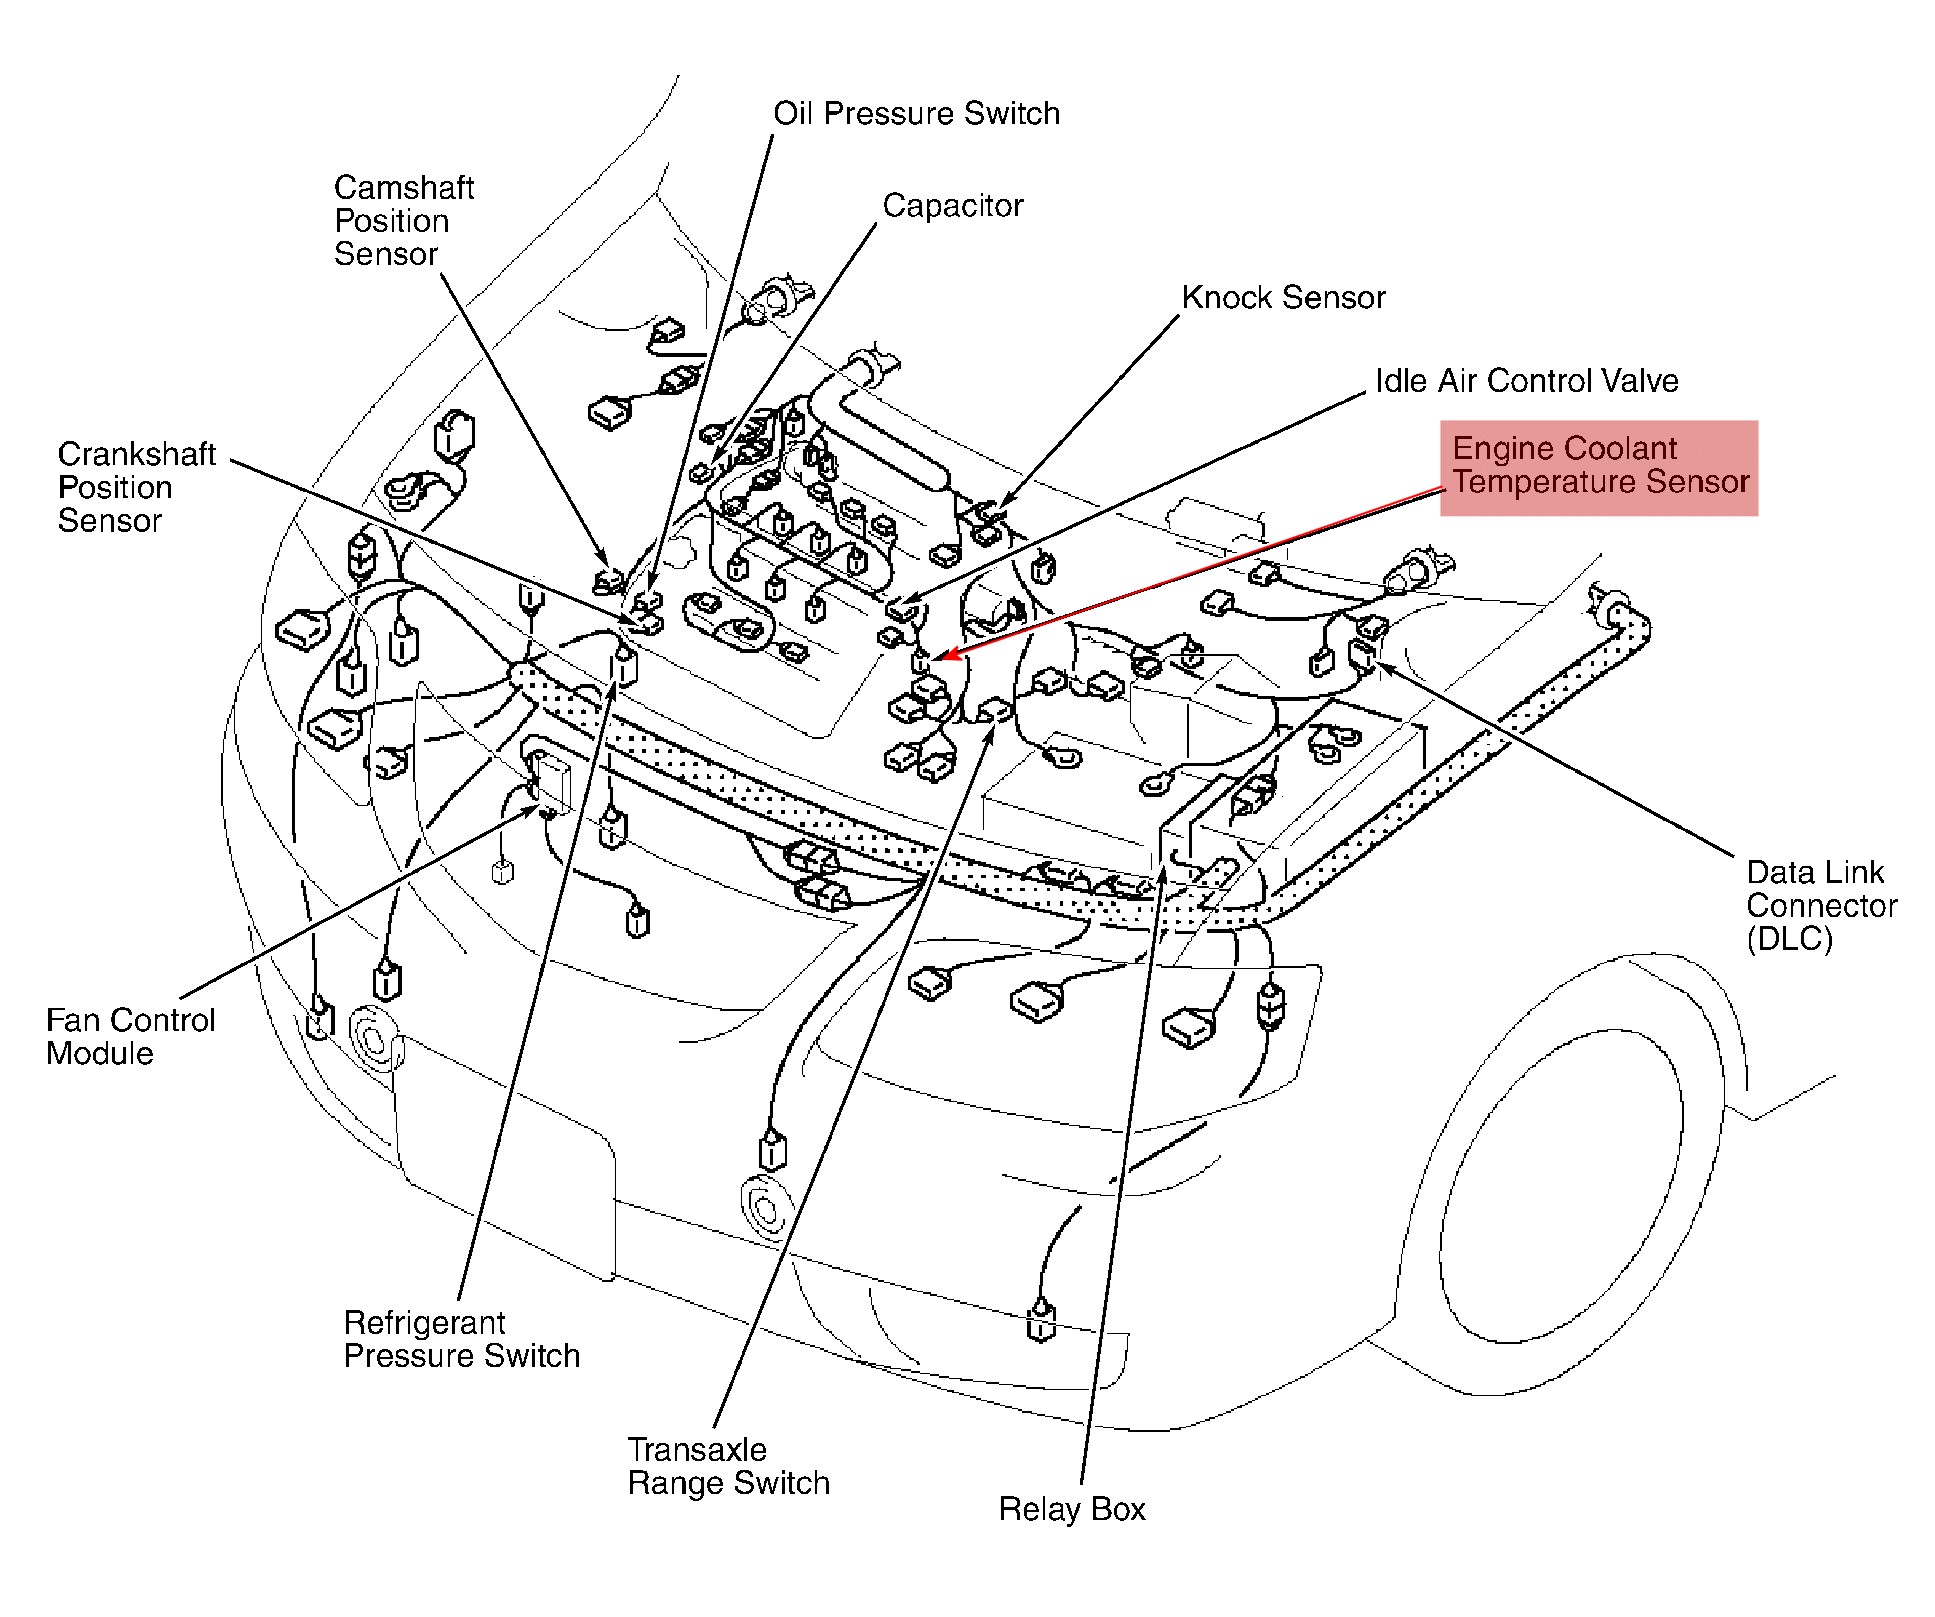 2003 ford Focus Zx3 Engine Diagram ford Focus 1 6 Lx Engine Diagram ford Wiring Diagrams Instructions Of 2003 ford Focus Zx3 Engine Diagram